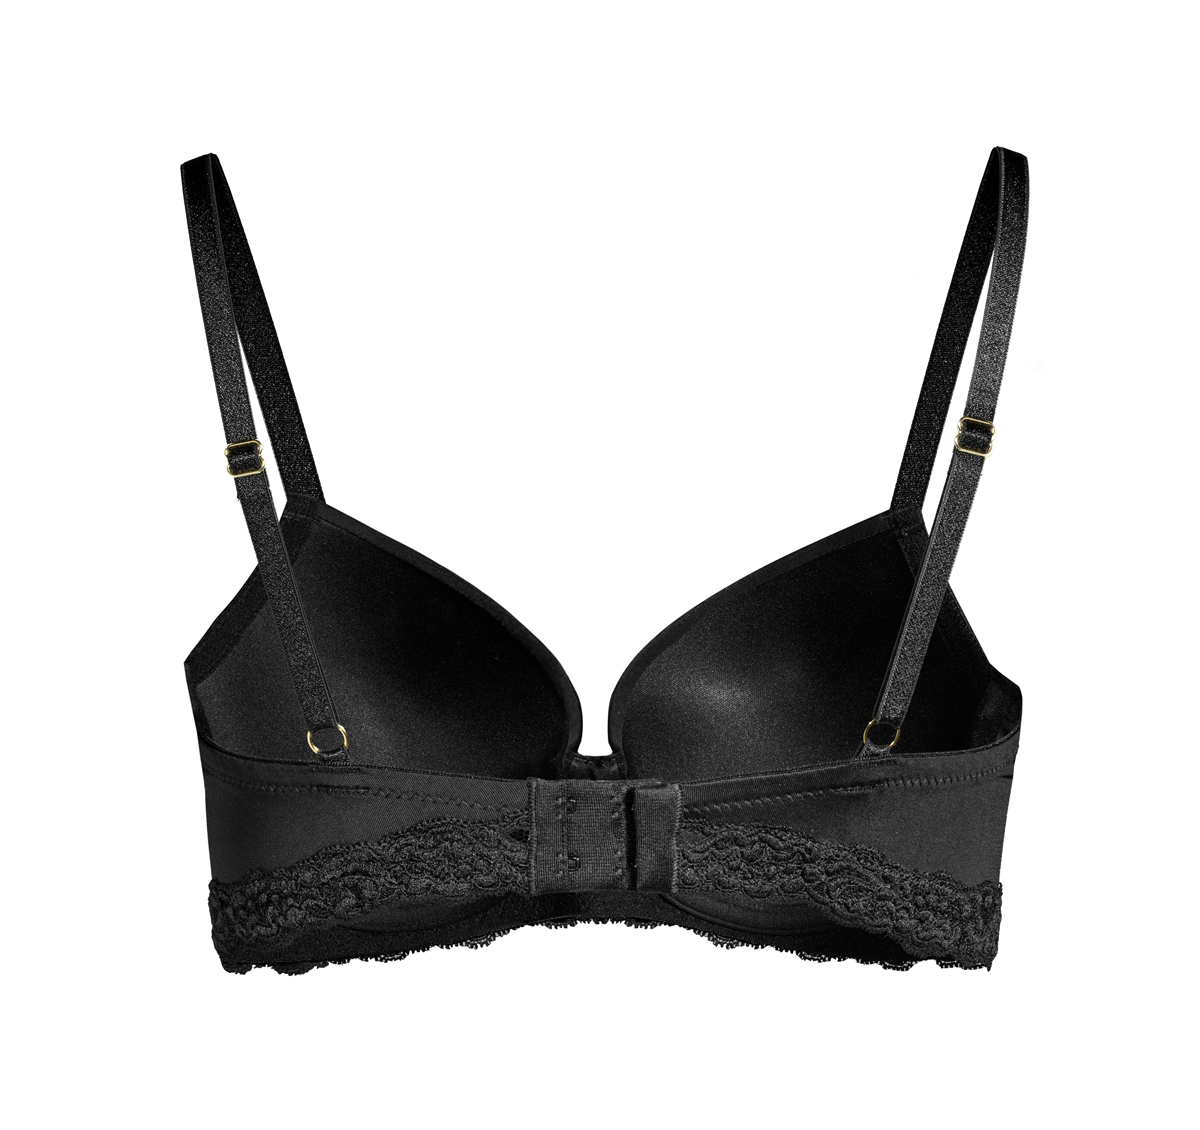 Uneven breasts? These bras will help